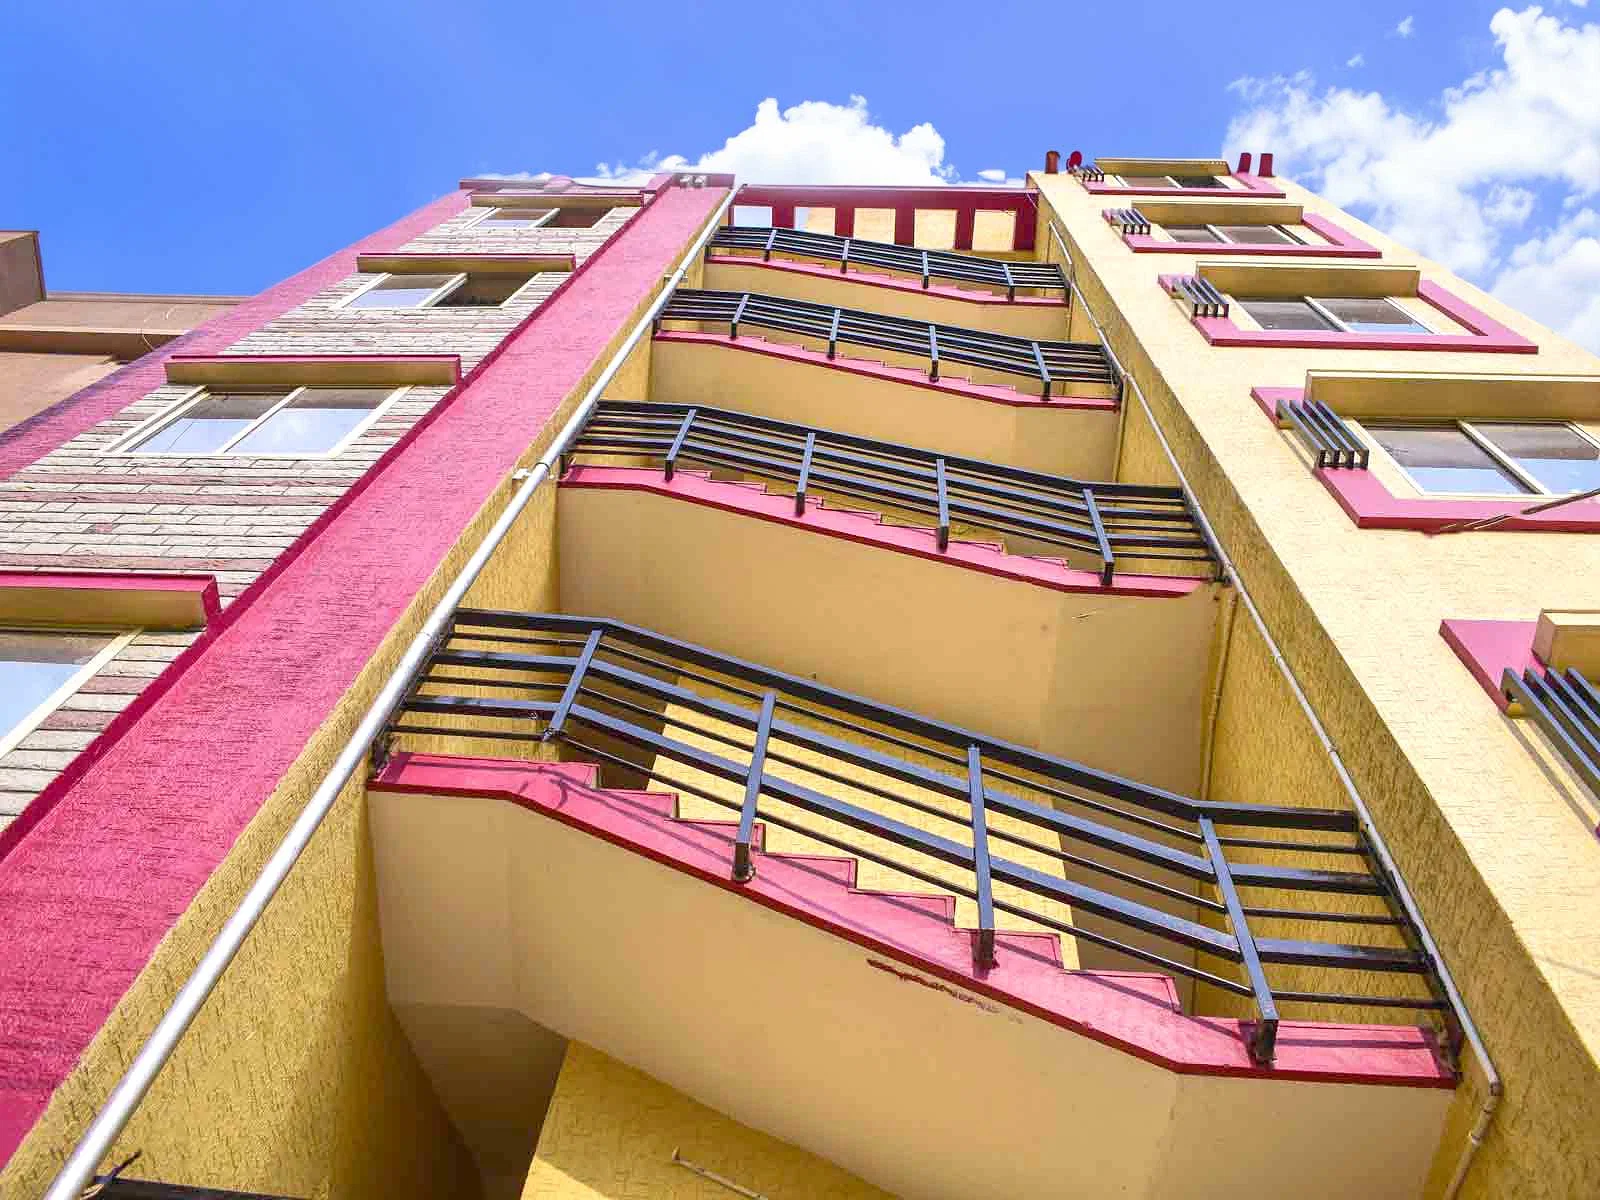 Fully furnished single/sharing rooms for rent in Manyata with no brokerage-apply fast-Zolo Scarlet